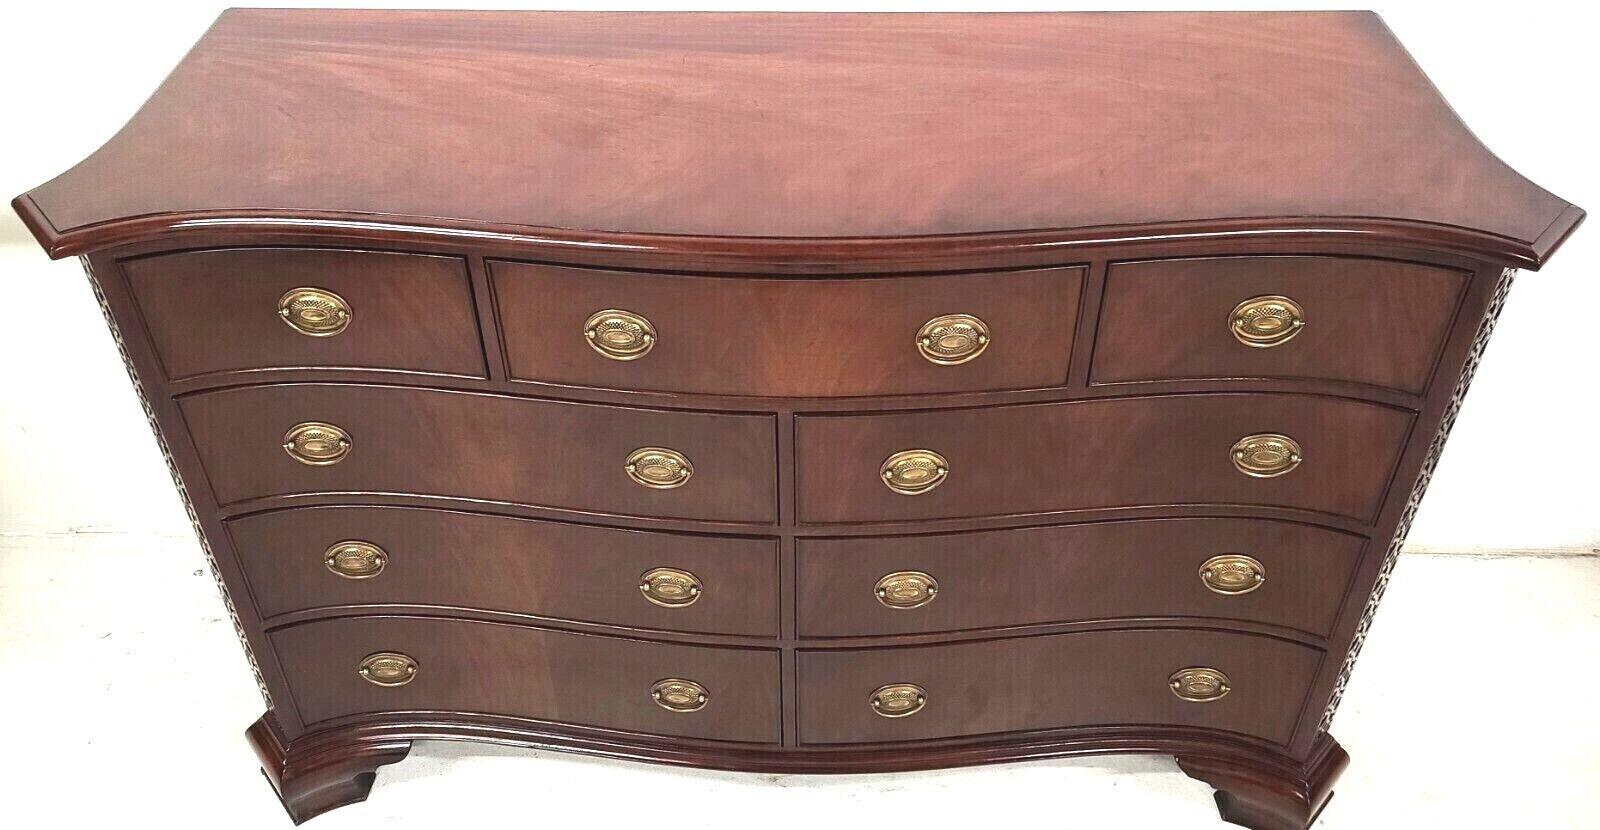 For FULL item description be sure to click on CONTINUE READING at the bottom of this listing.

Offering One Of Our Recent Palm Beach Estate Fine Furniture Acquisitions Of A
Rare LLOYD BUXTON English Regency Flame Mahogany Dresser

This listing and